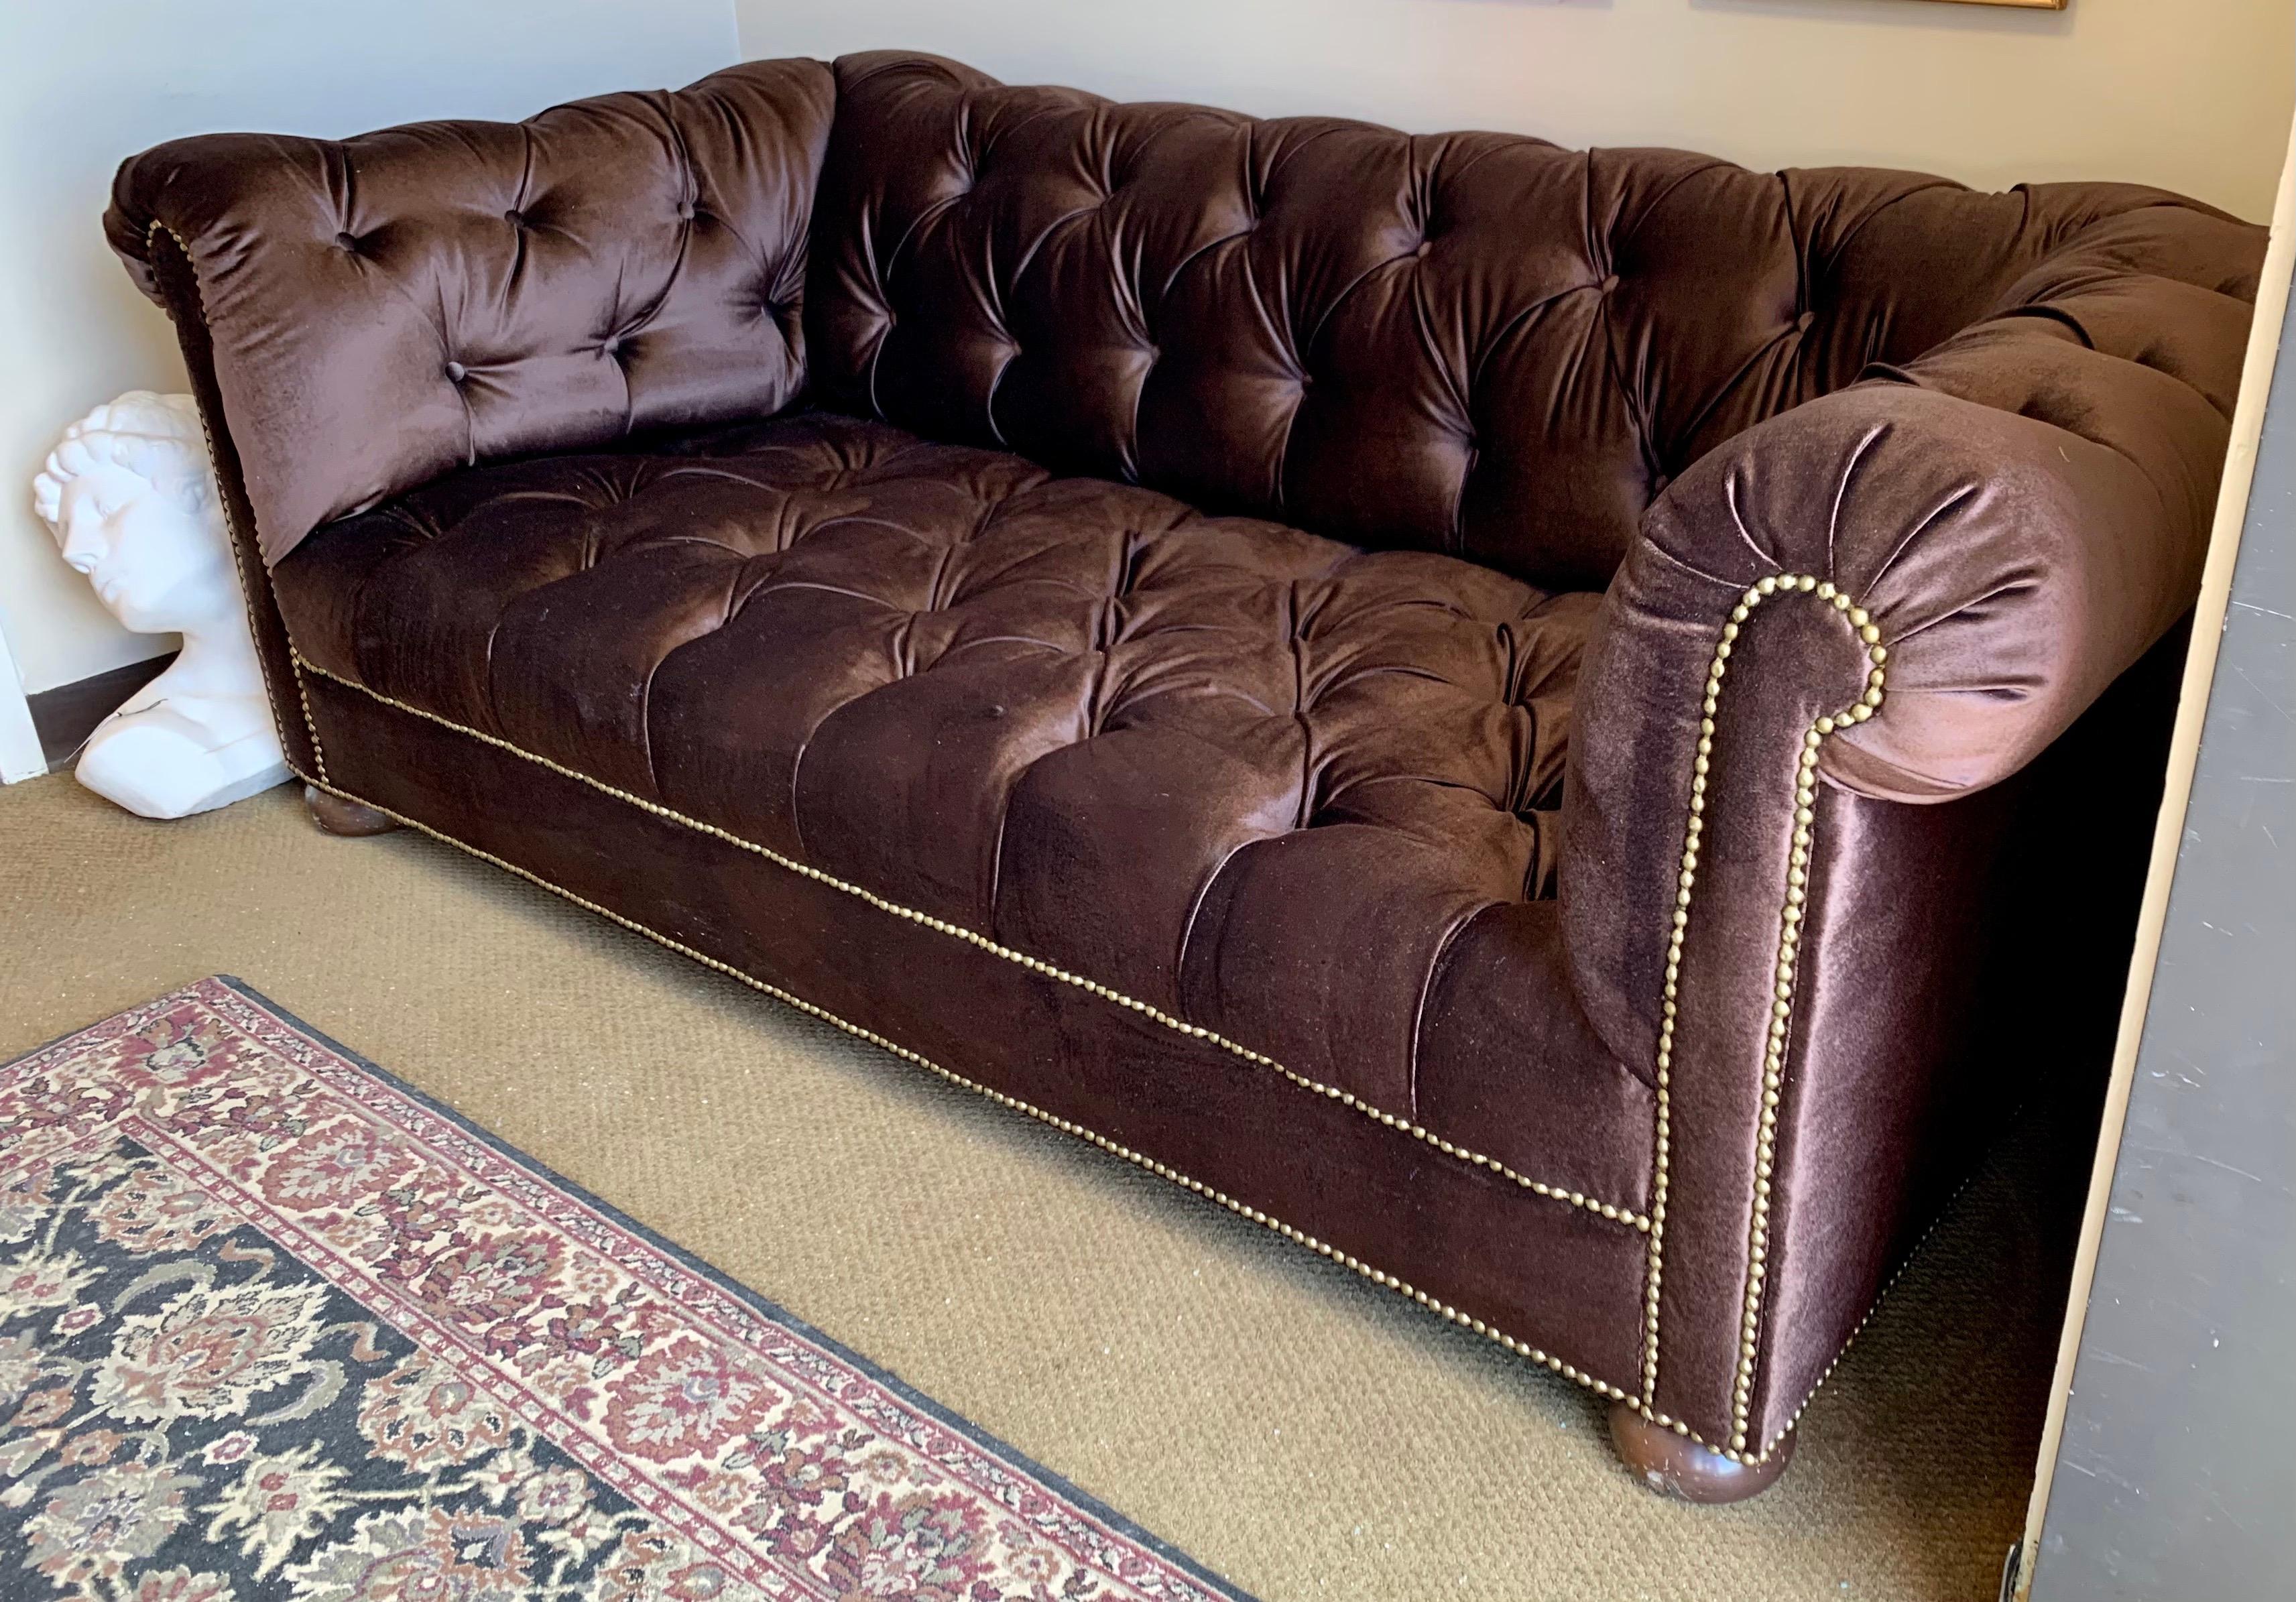 Newly upholstered seven foot chesterfield sofa by Brunschwig & Fils done in a luxurious chocolate
brown velvet (not Brunschwig fabric), gorgeous lines and better scale. The sofa is adorned with nailheads
at border which make brown velvet look that